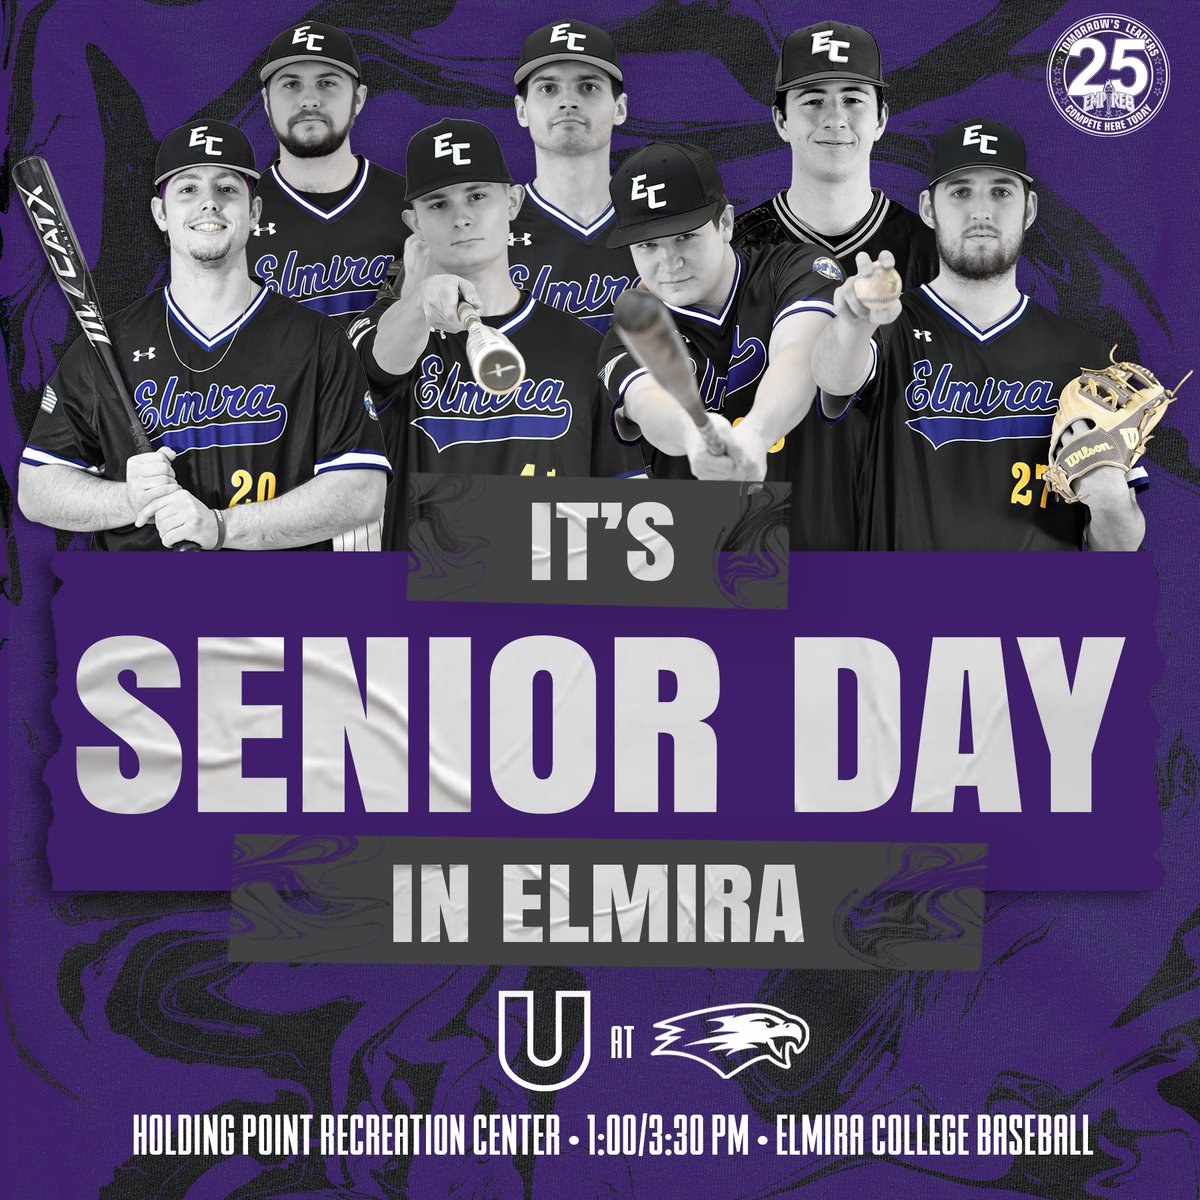 First Pitches, Senior Day, Baseball! @ElmiraBaseball wraps up @Empire8 action this weekend against the Pioneers!

🆚 Utica
🕐 1:00 PM/3:30 PM 
📍 Horseheads, NY | Holding Point
📺 & 📊: bit.ly/3lKw2jp

#TogetherWeFly #FightOn4EC #ElmiraProud